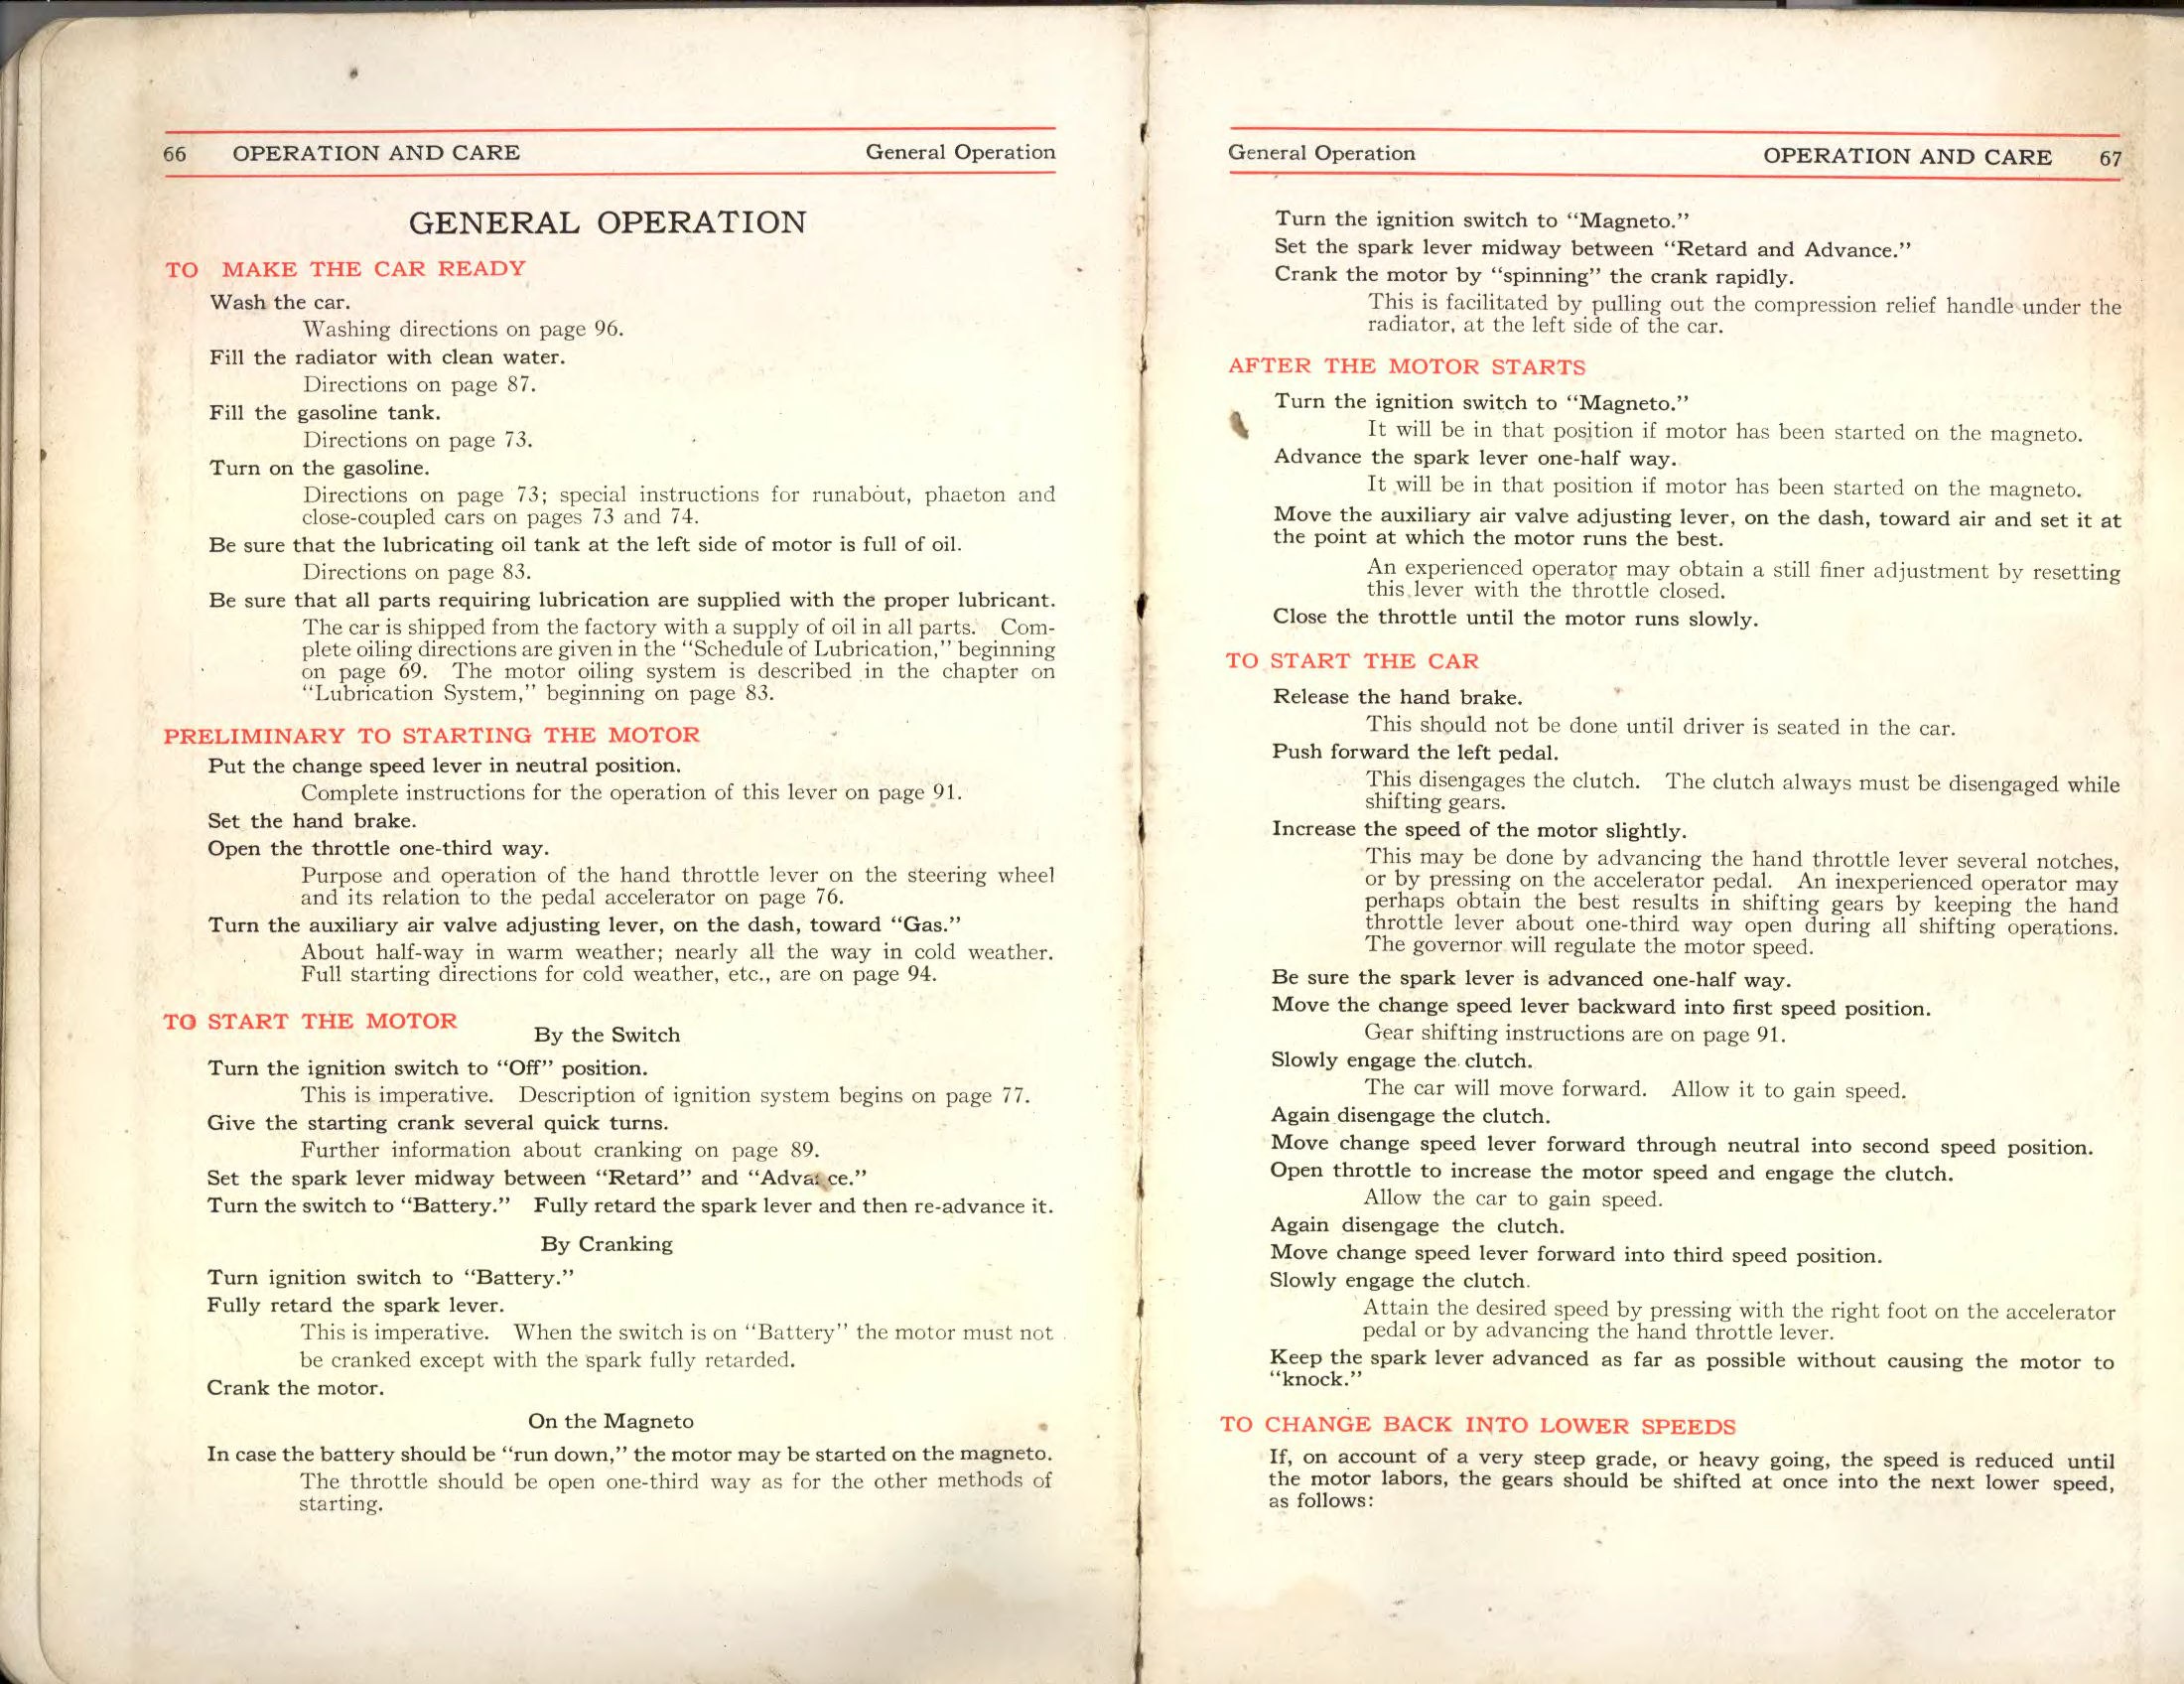 1911 Packard Owners Manual Page 27